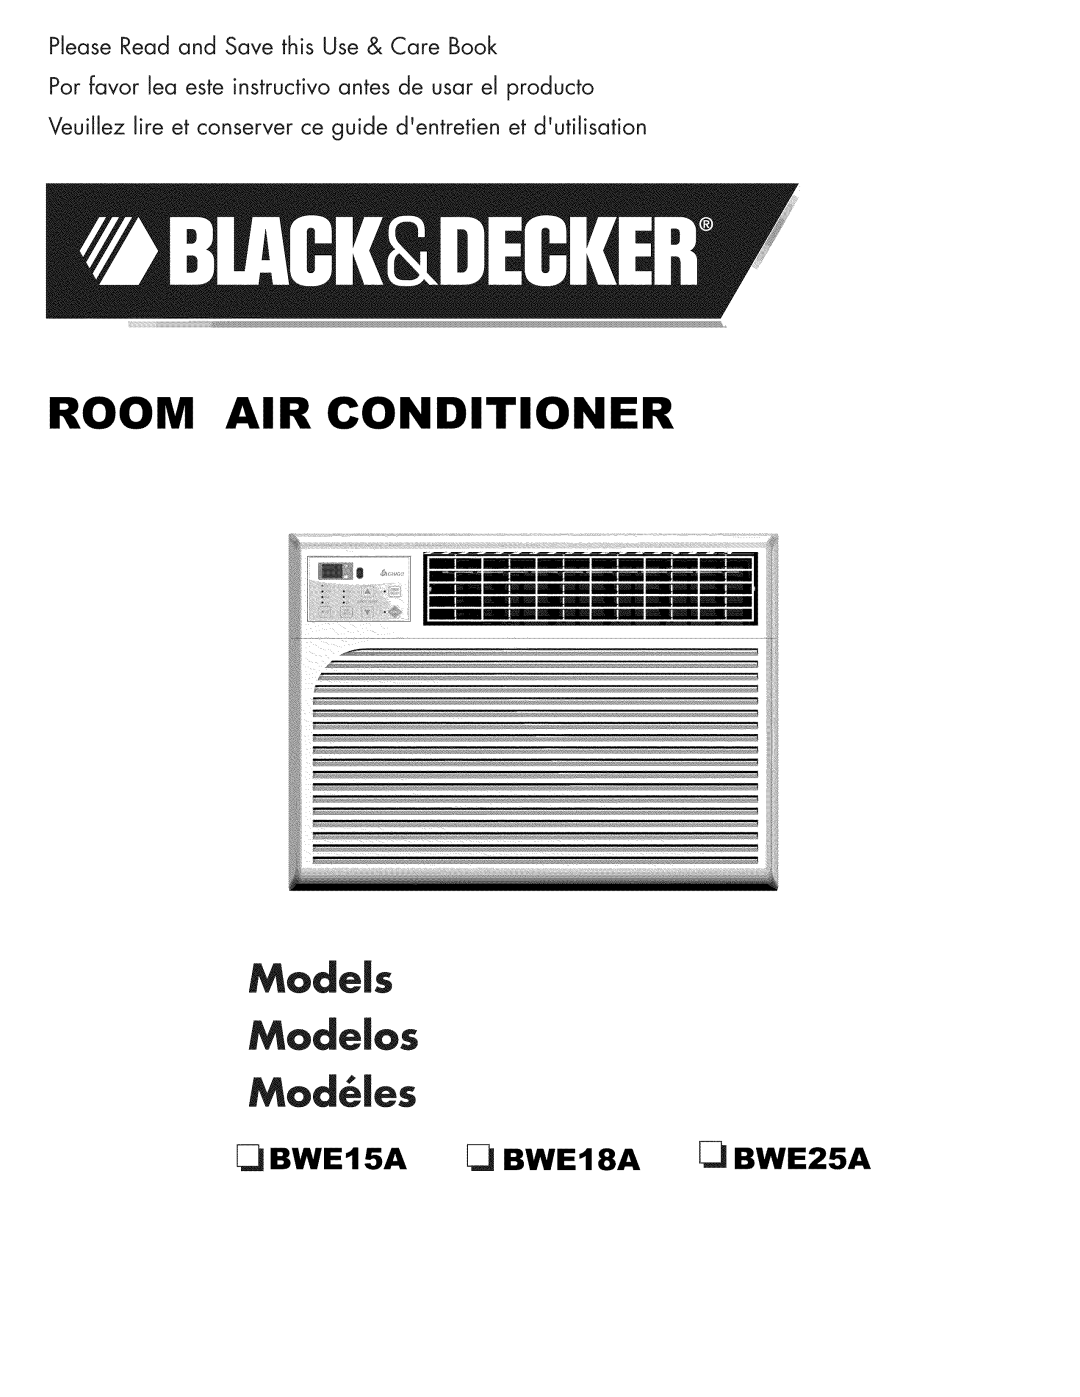 Black & Decker manual Room Air Conditioner, BWE15A BWE18A BWE25A, Please Read and Save this Use & Care Book 